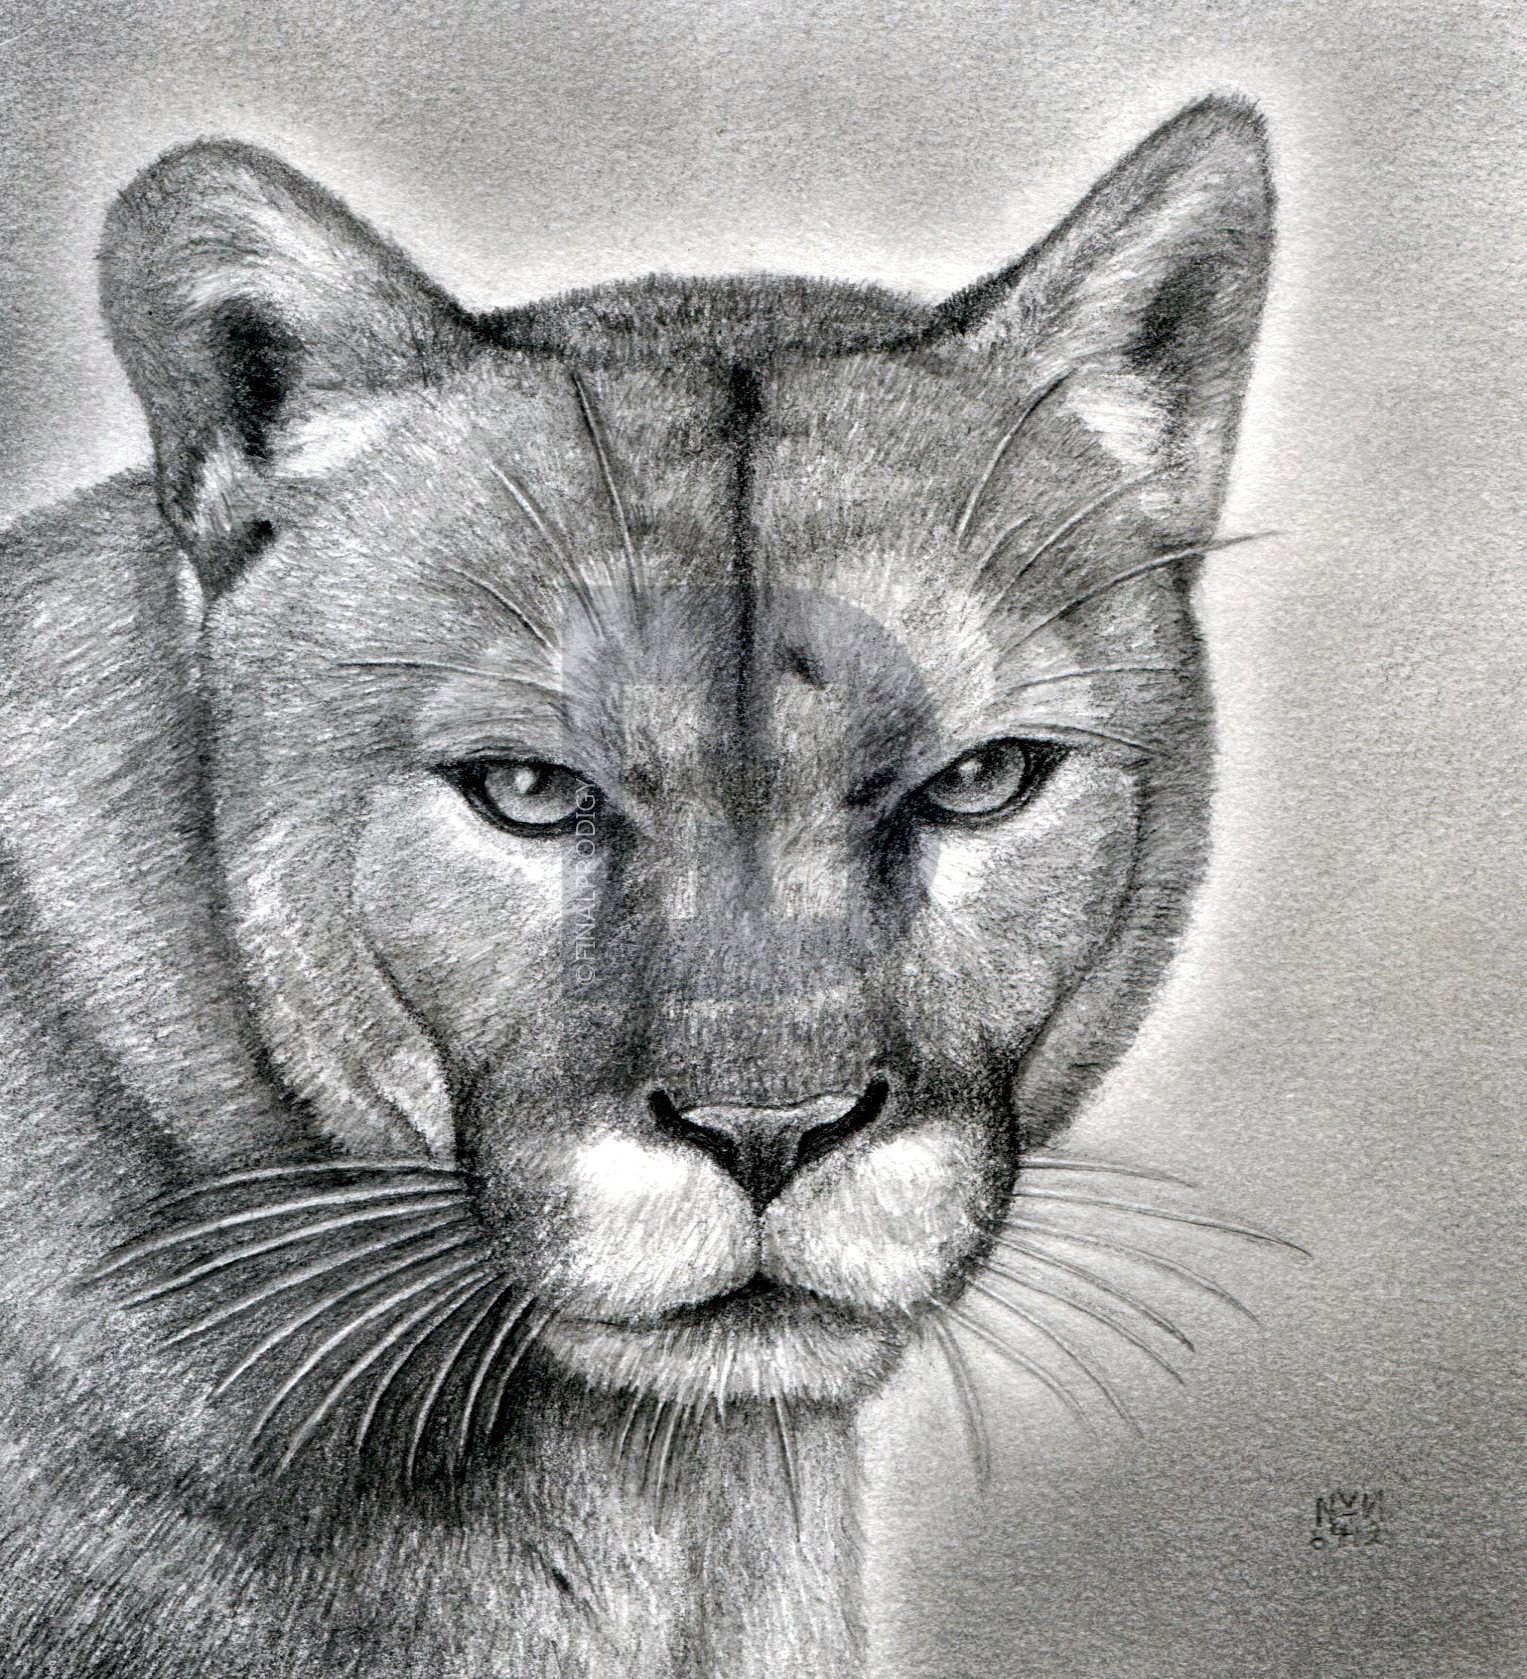 Puma paintings search result at